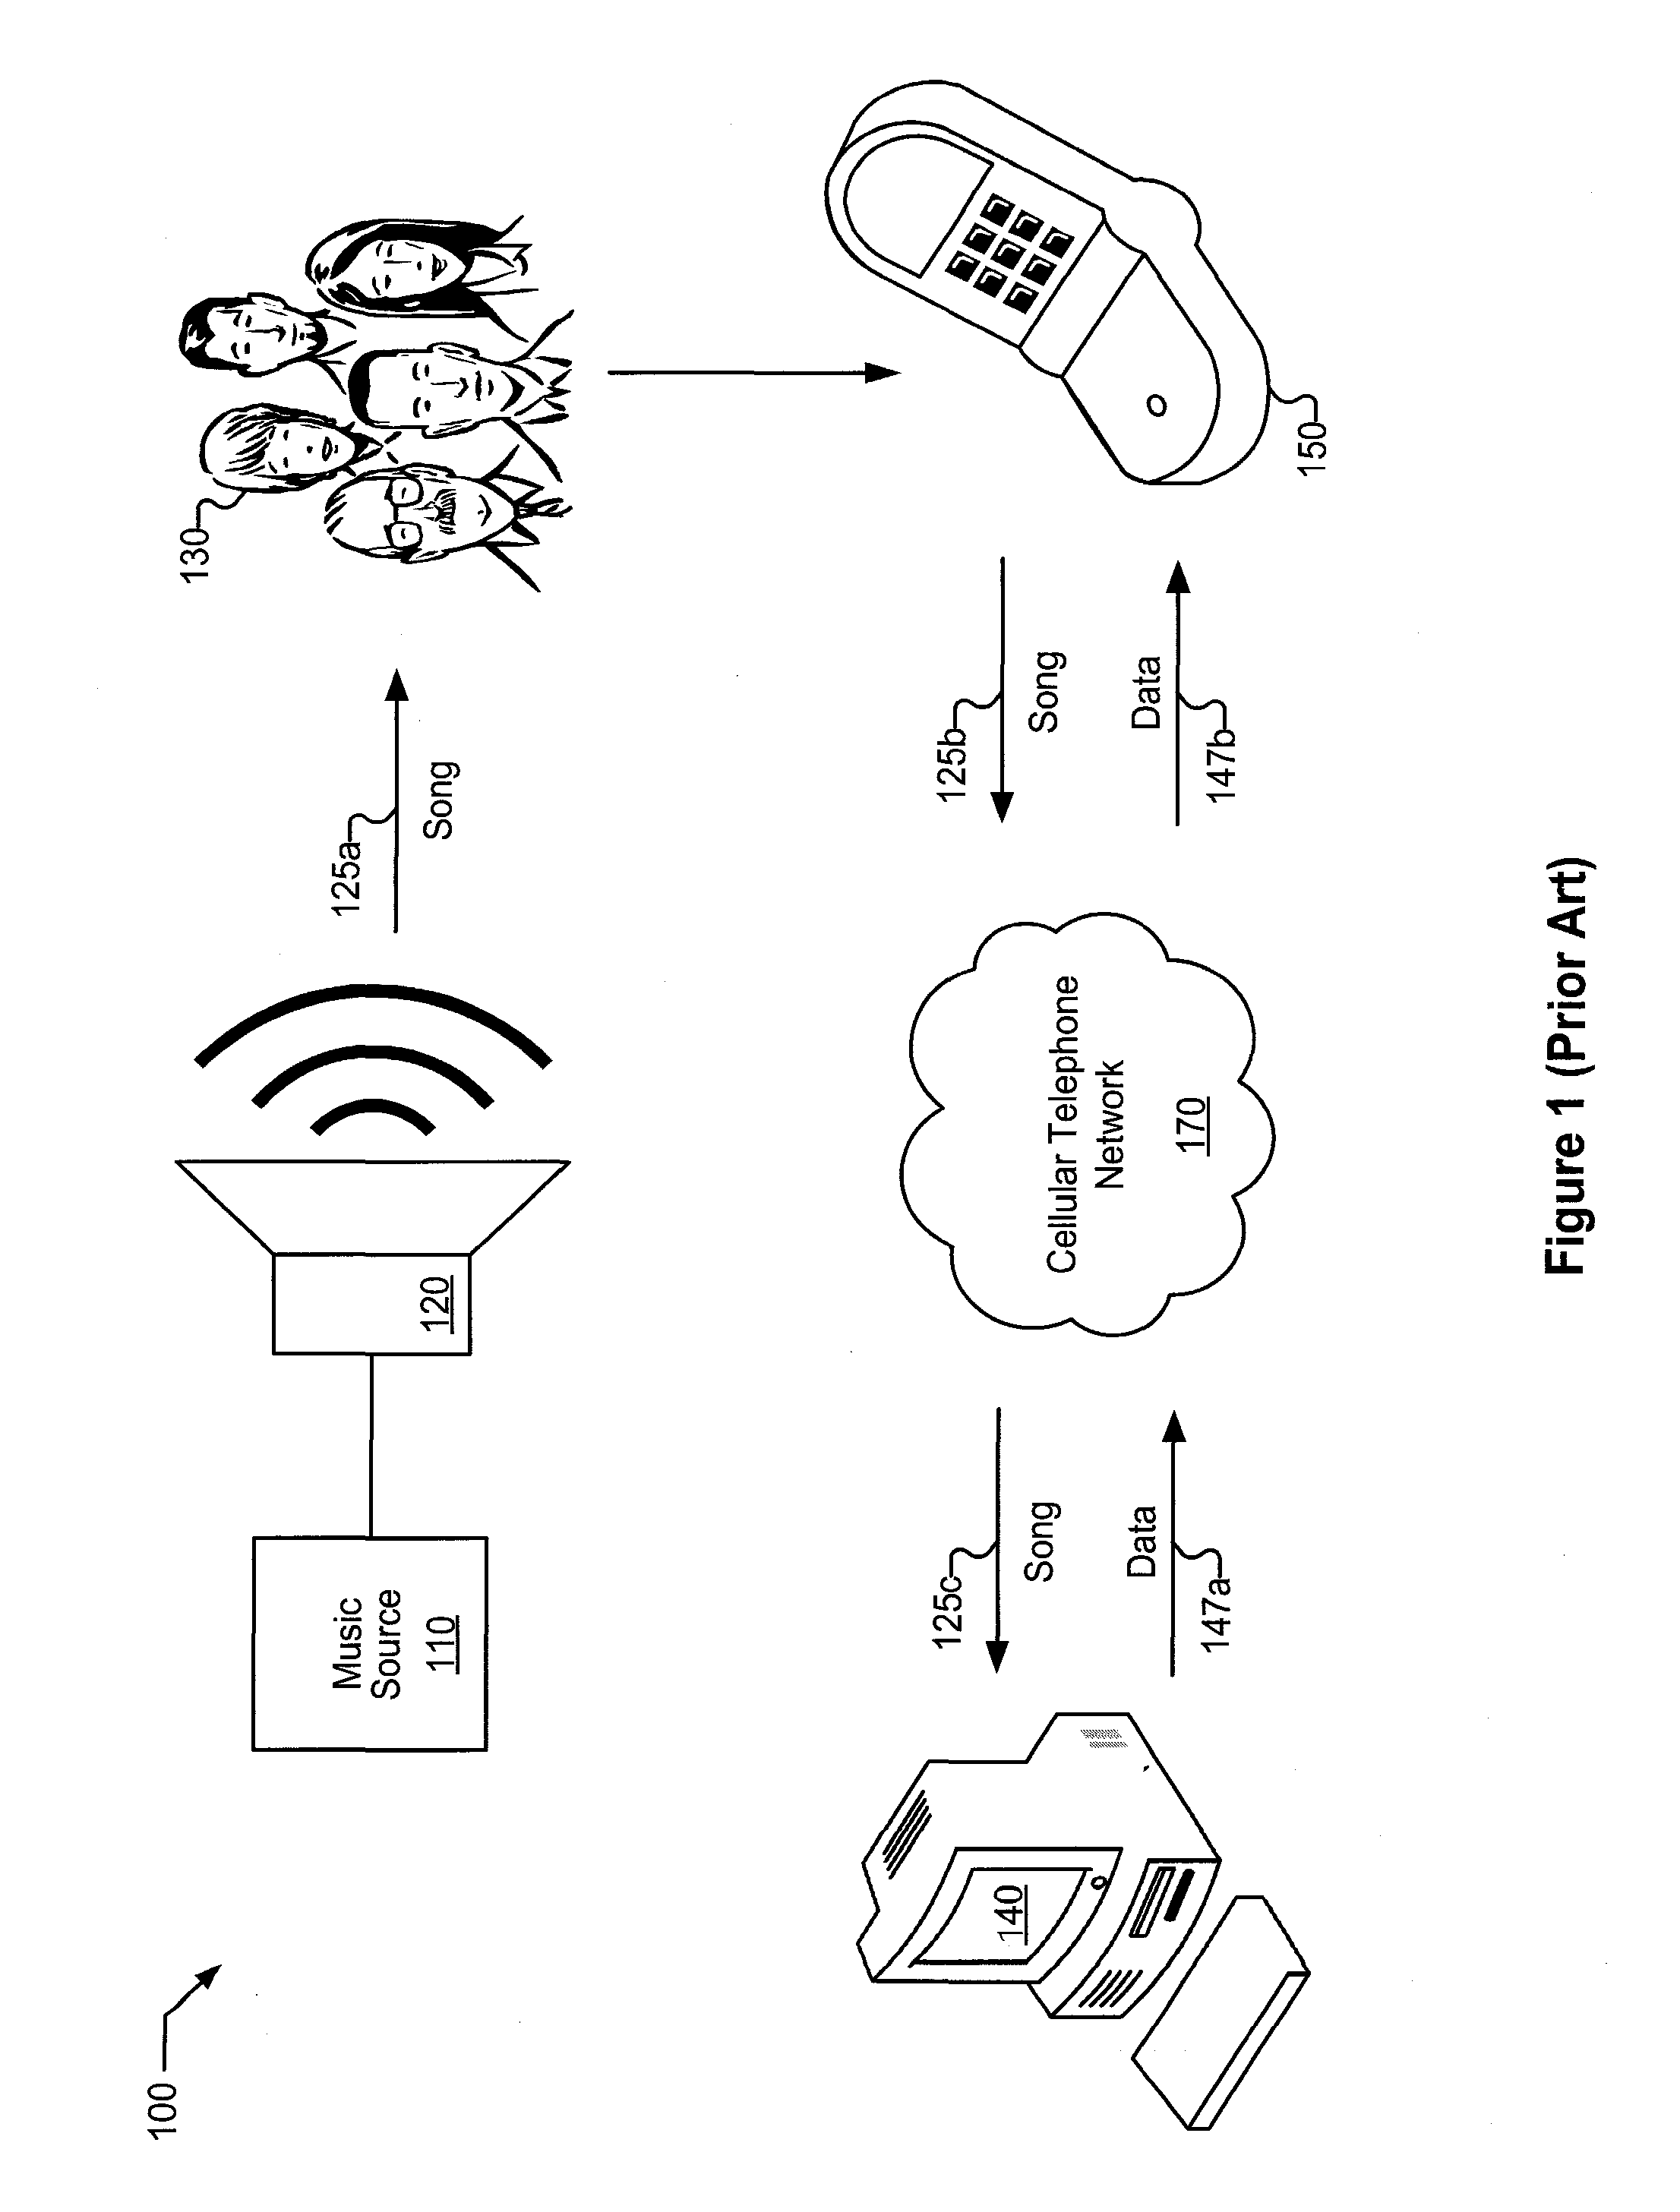 Systems and Methods for Music Recognition